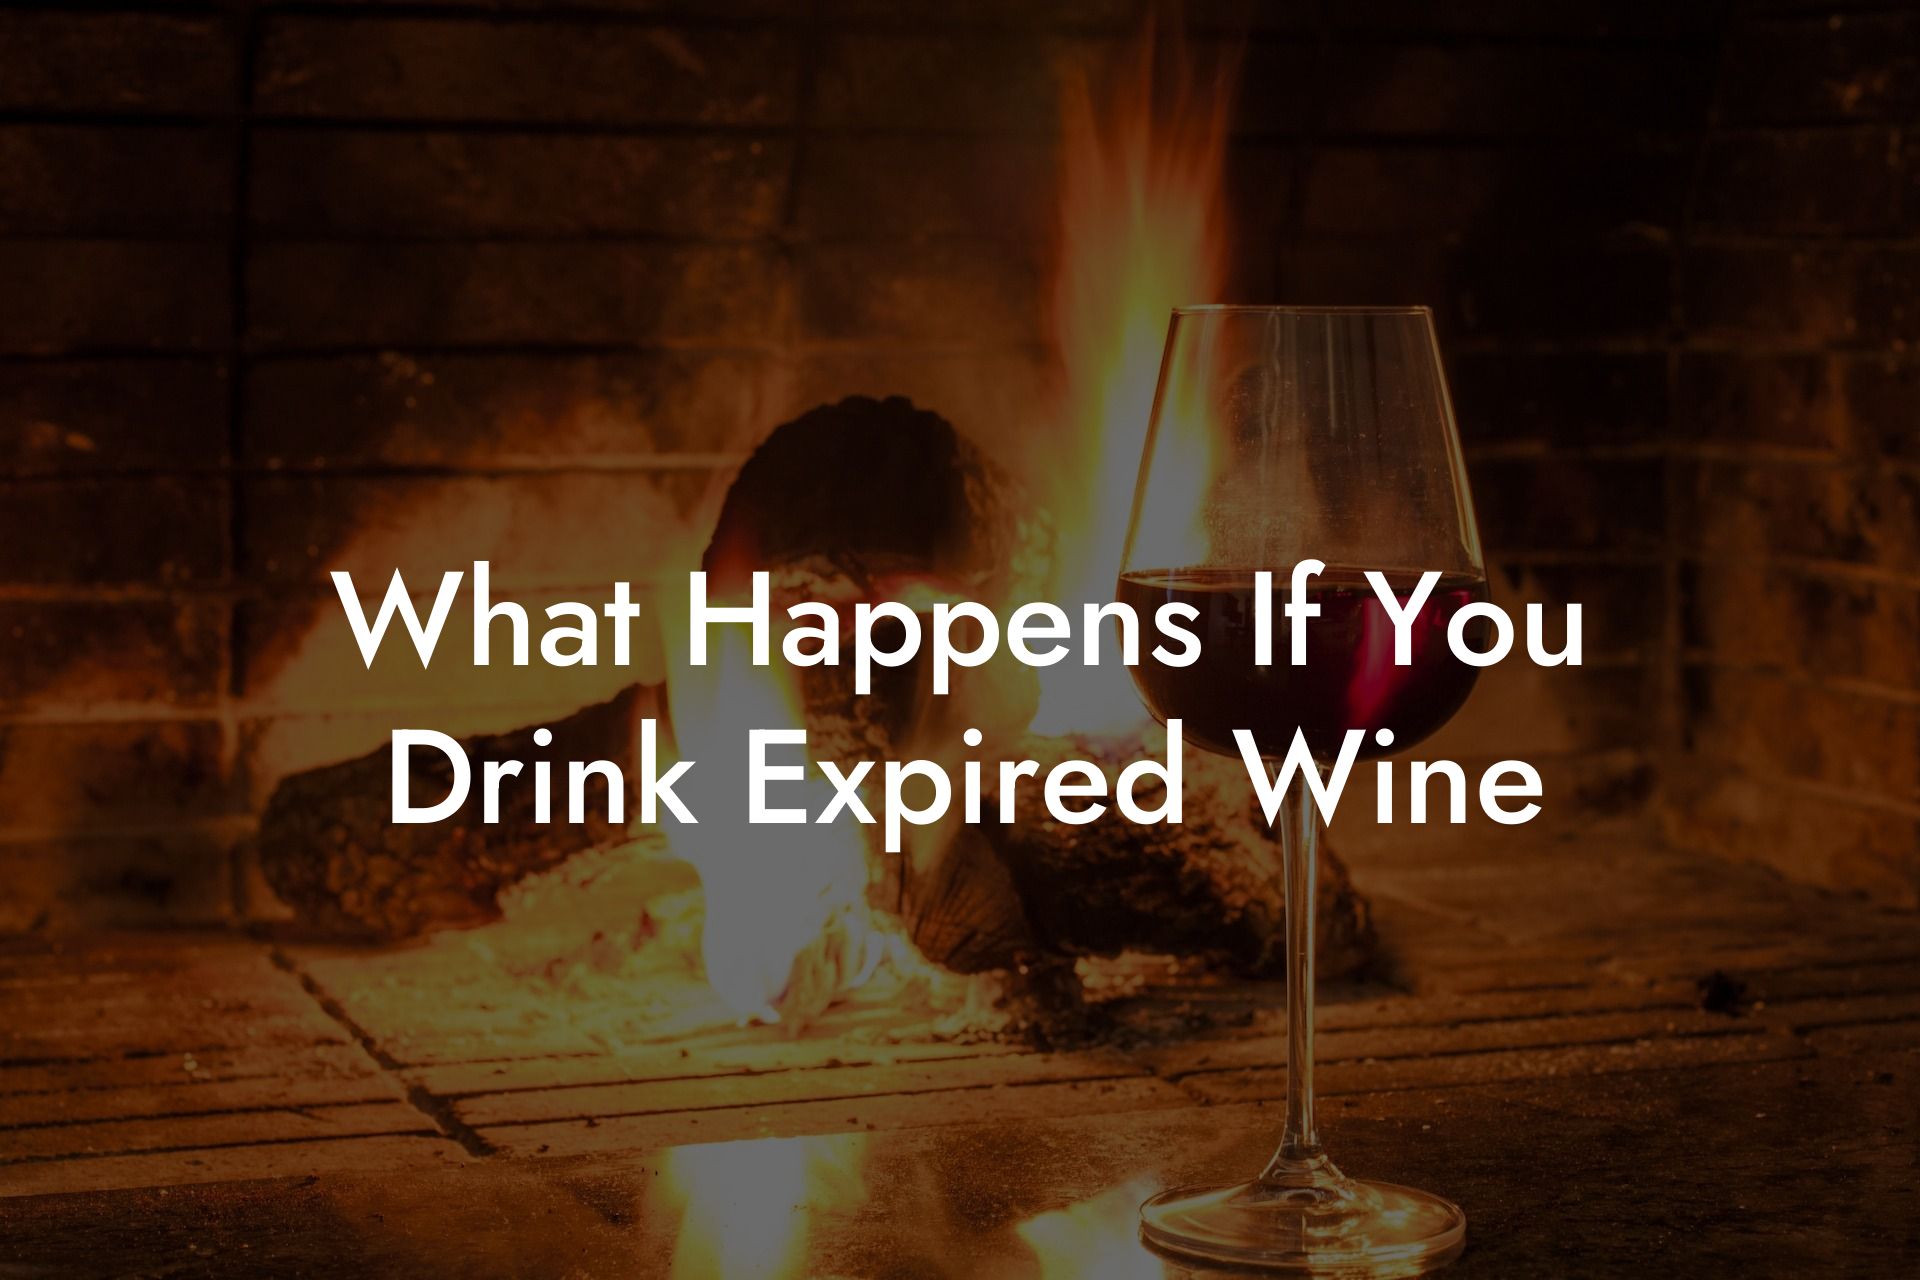 What Happens If You Drink Expired Wine